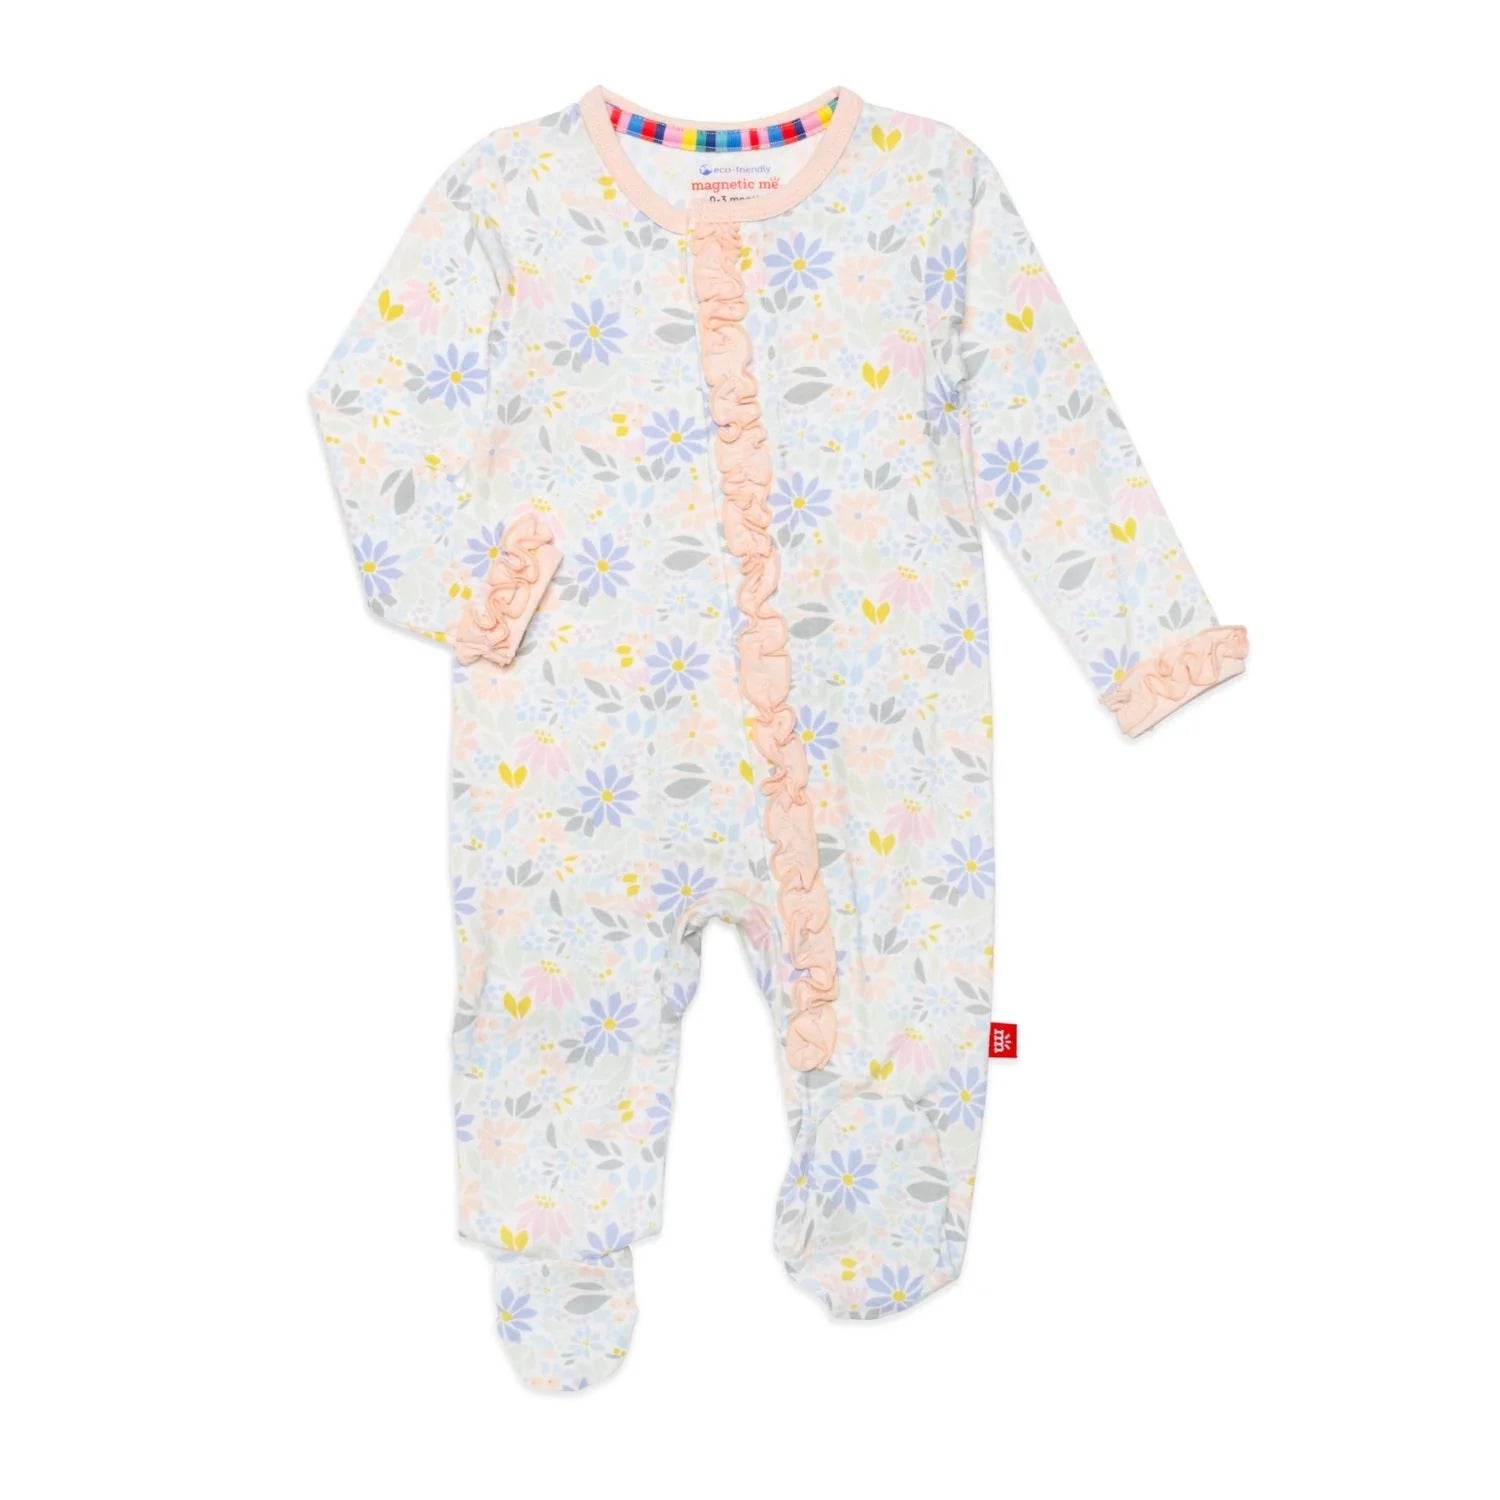 Newest Baby Products & Kids Products